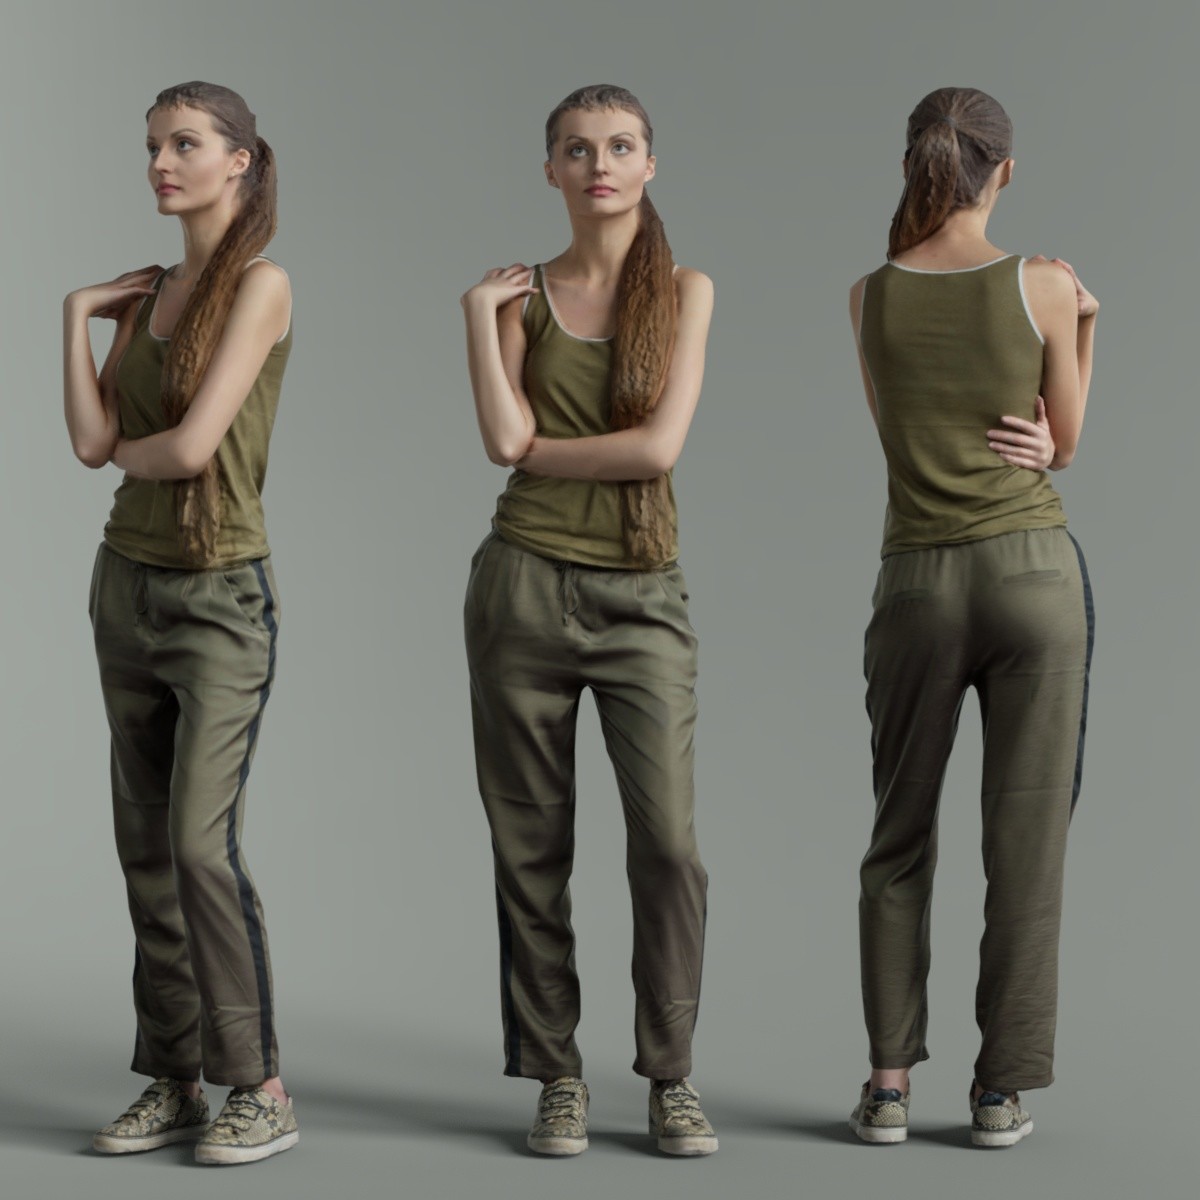 ArtStation - Casual Girl in Green outfit | Resources